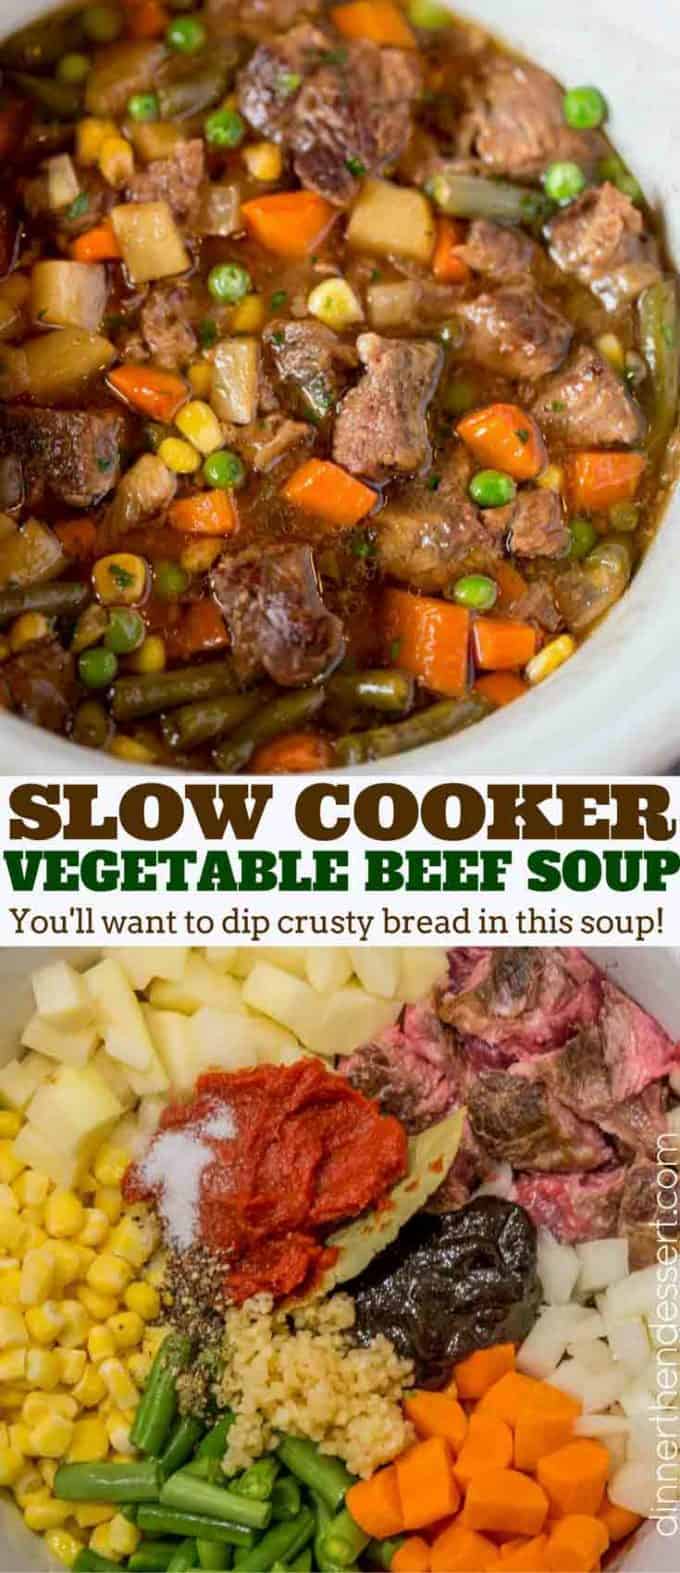 Slow Cooker Vegetable Beef Soup with is the most comforting, EASY soup you'll make. You'll want to dip crusty bread into the amazing flavors in this soup! #soup #beef #slowcooker #crockpot #comfortfood